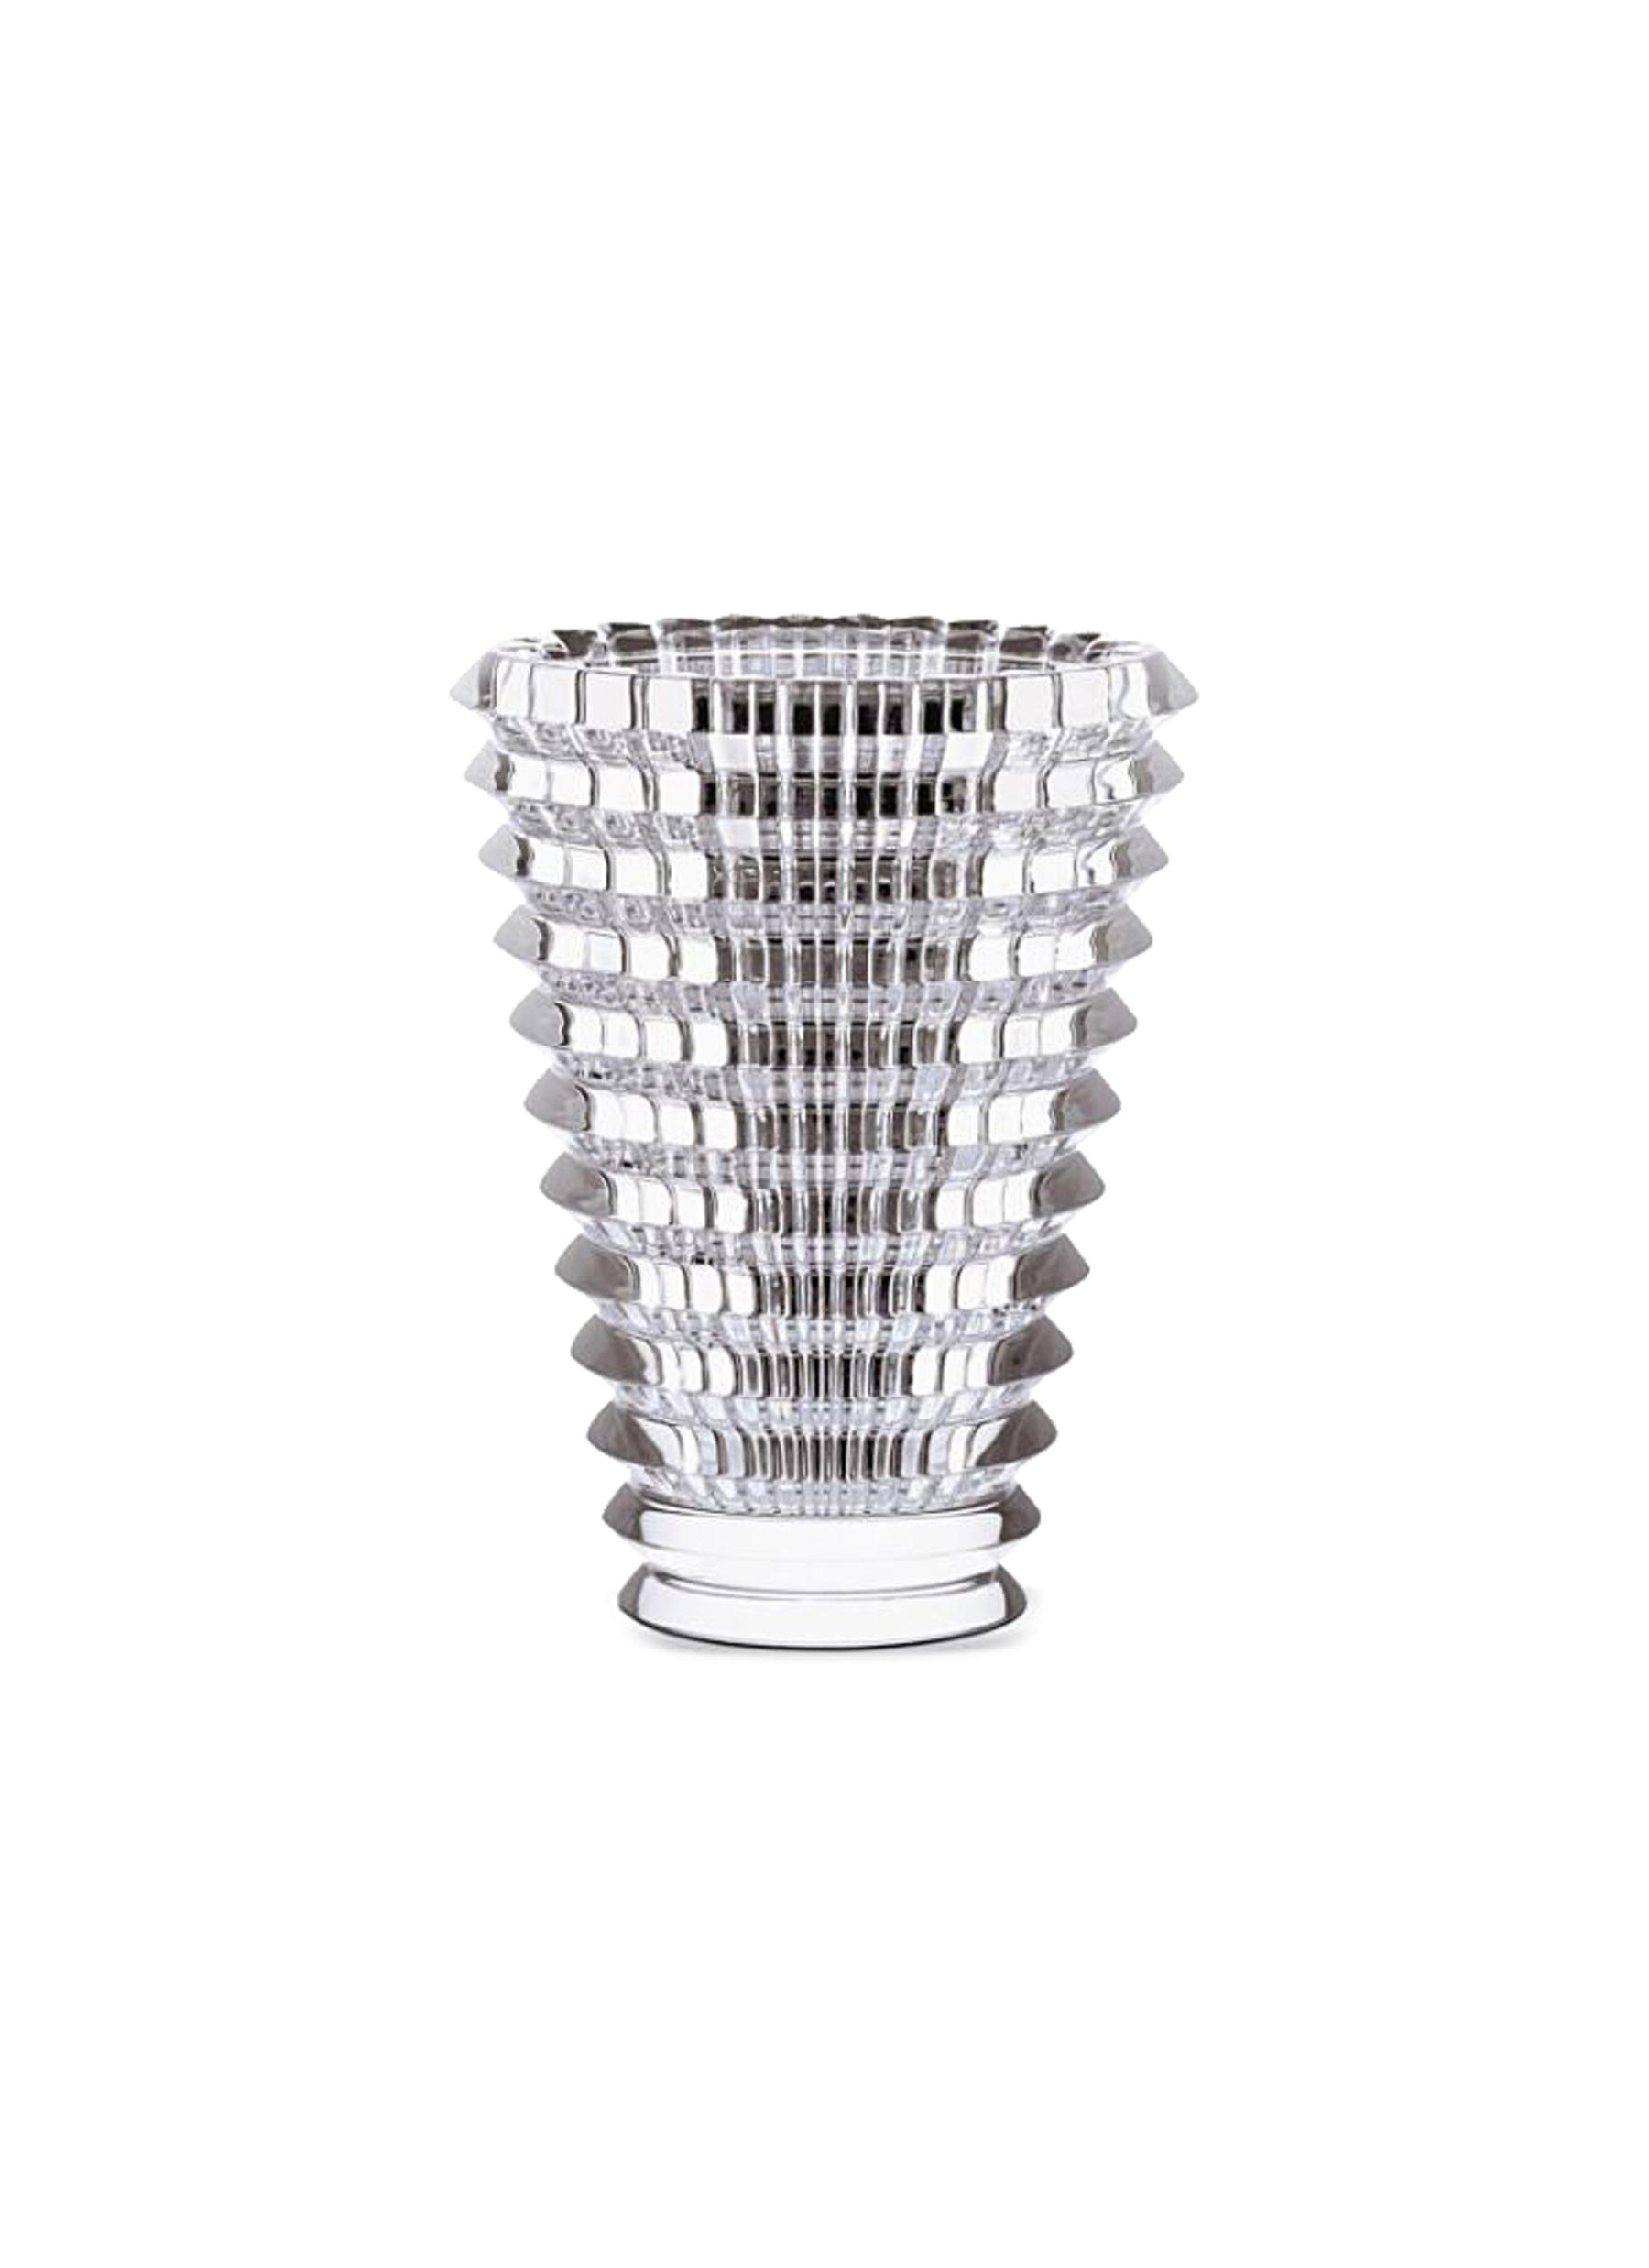 BACCARAT SMALL EYE VASE - CLEAR